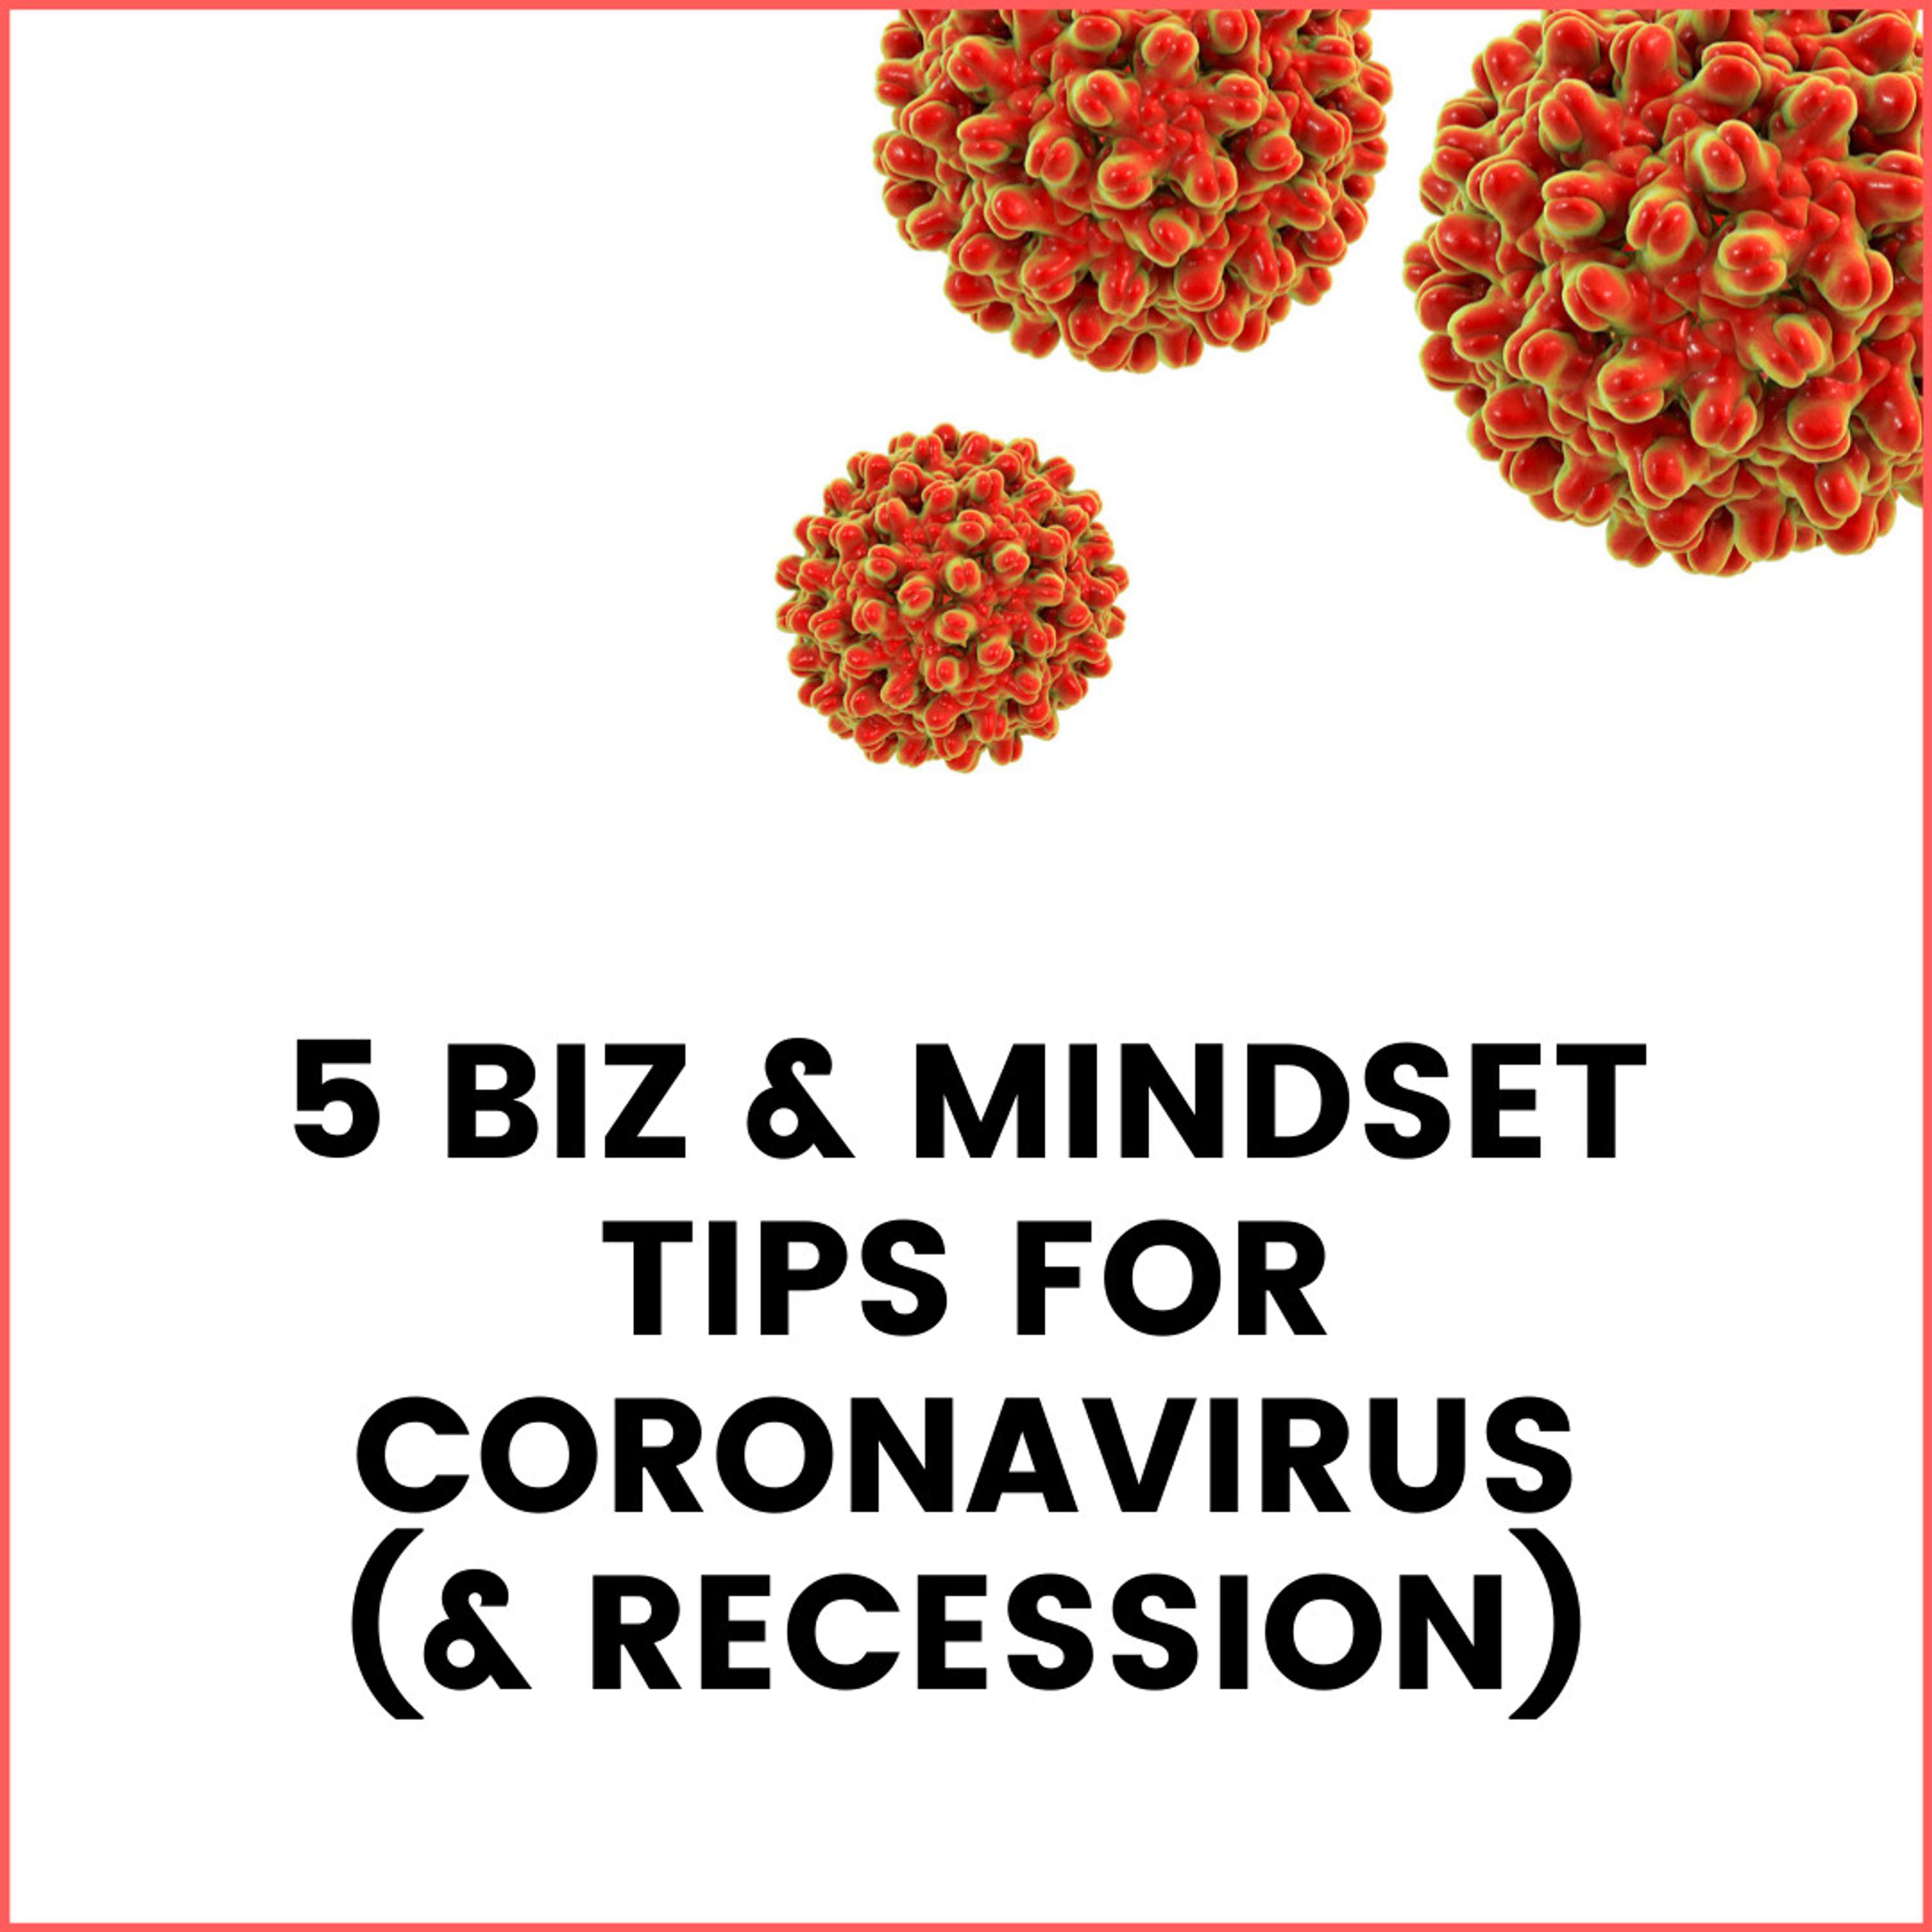 28. 5 Business & Mindset Tips for Dealing with Coronavirus and Recession